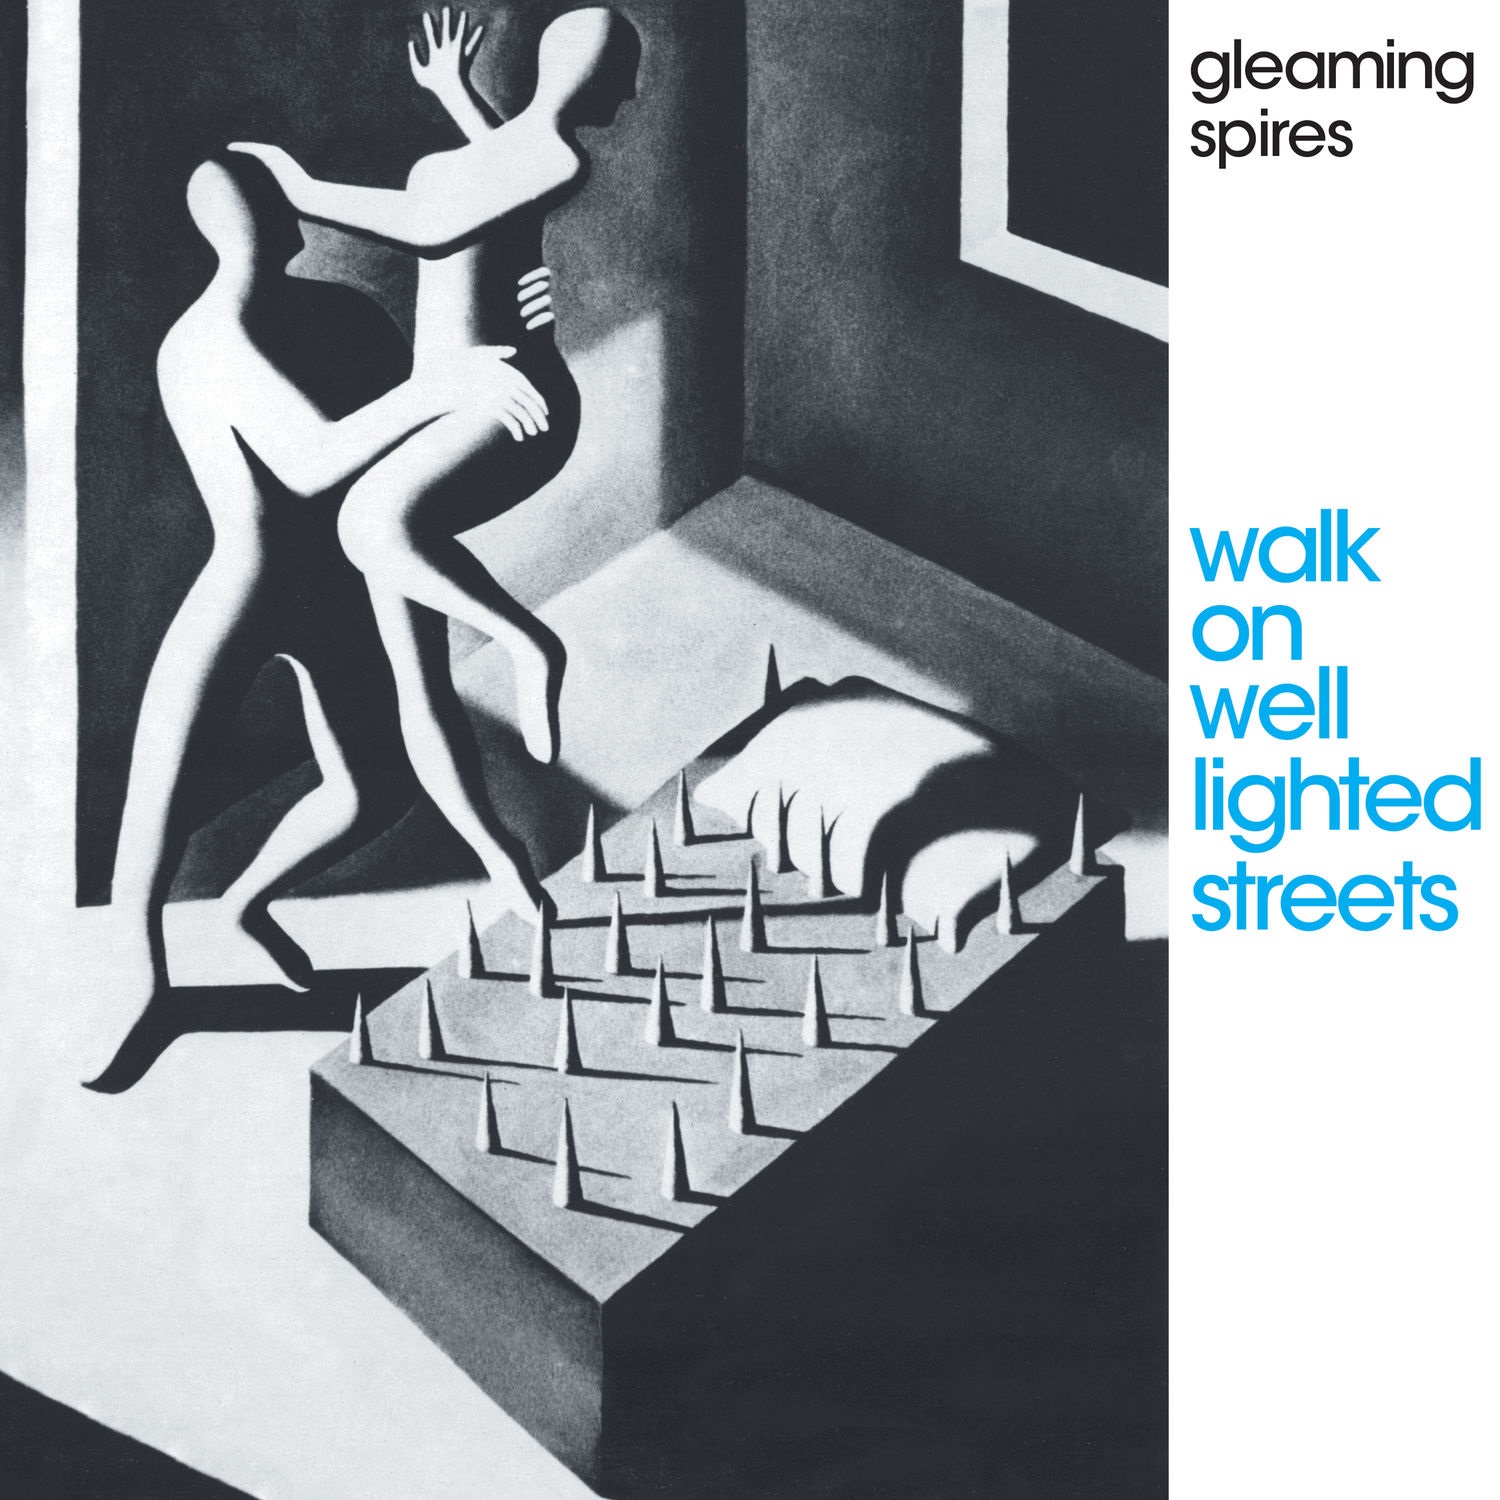 Gleaming Spires - Walk on Well Lighted Streets (Expanded Edition) (1983/2021) [FLAC 24bit/96kHz]